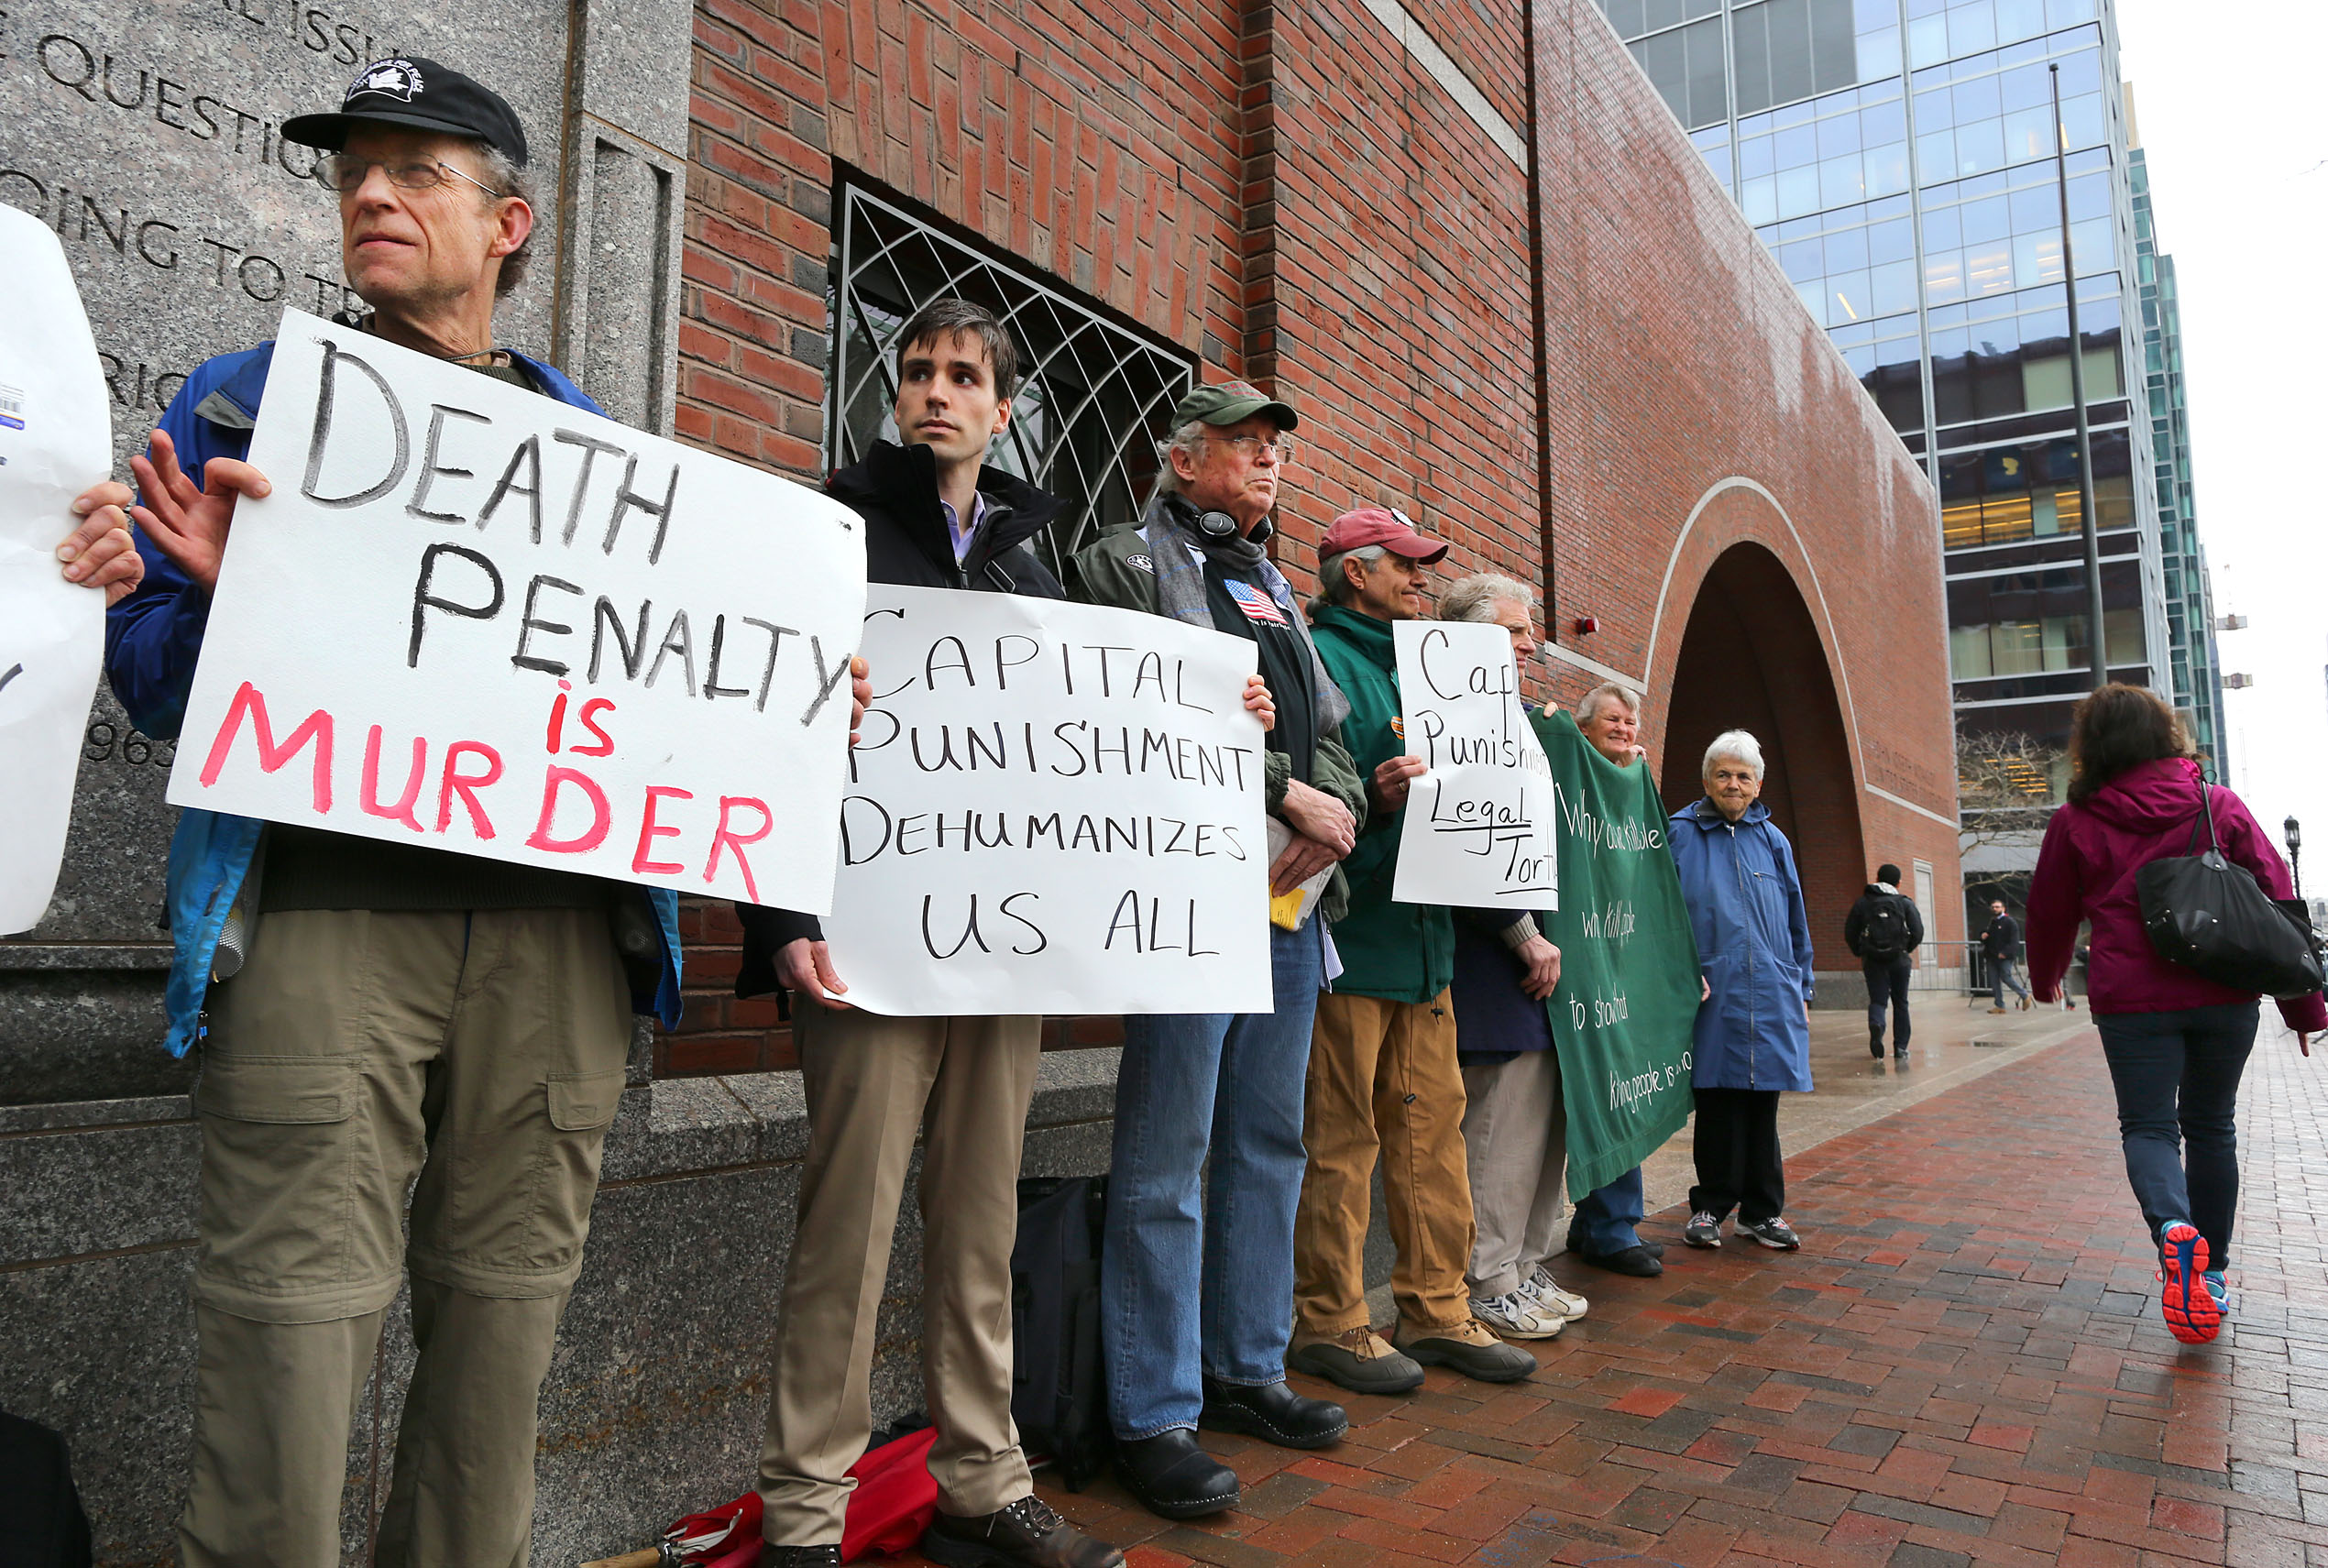 Demonstrators against the death penalty stand outside the Moakley Federal Court during first day of the penalty phase for Boston Marathon bomber Dzhokhar Tsarnaev on April 21, 2015 in Boston.